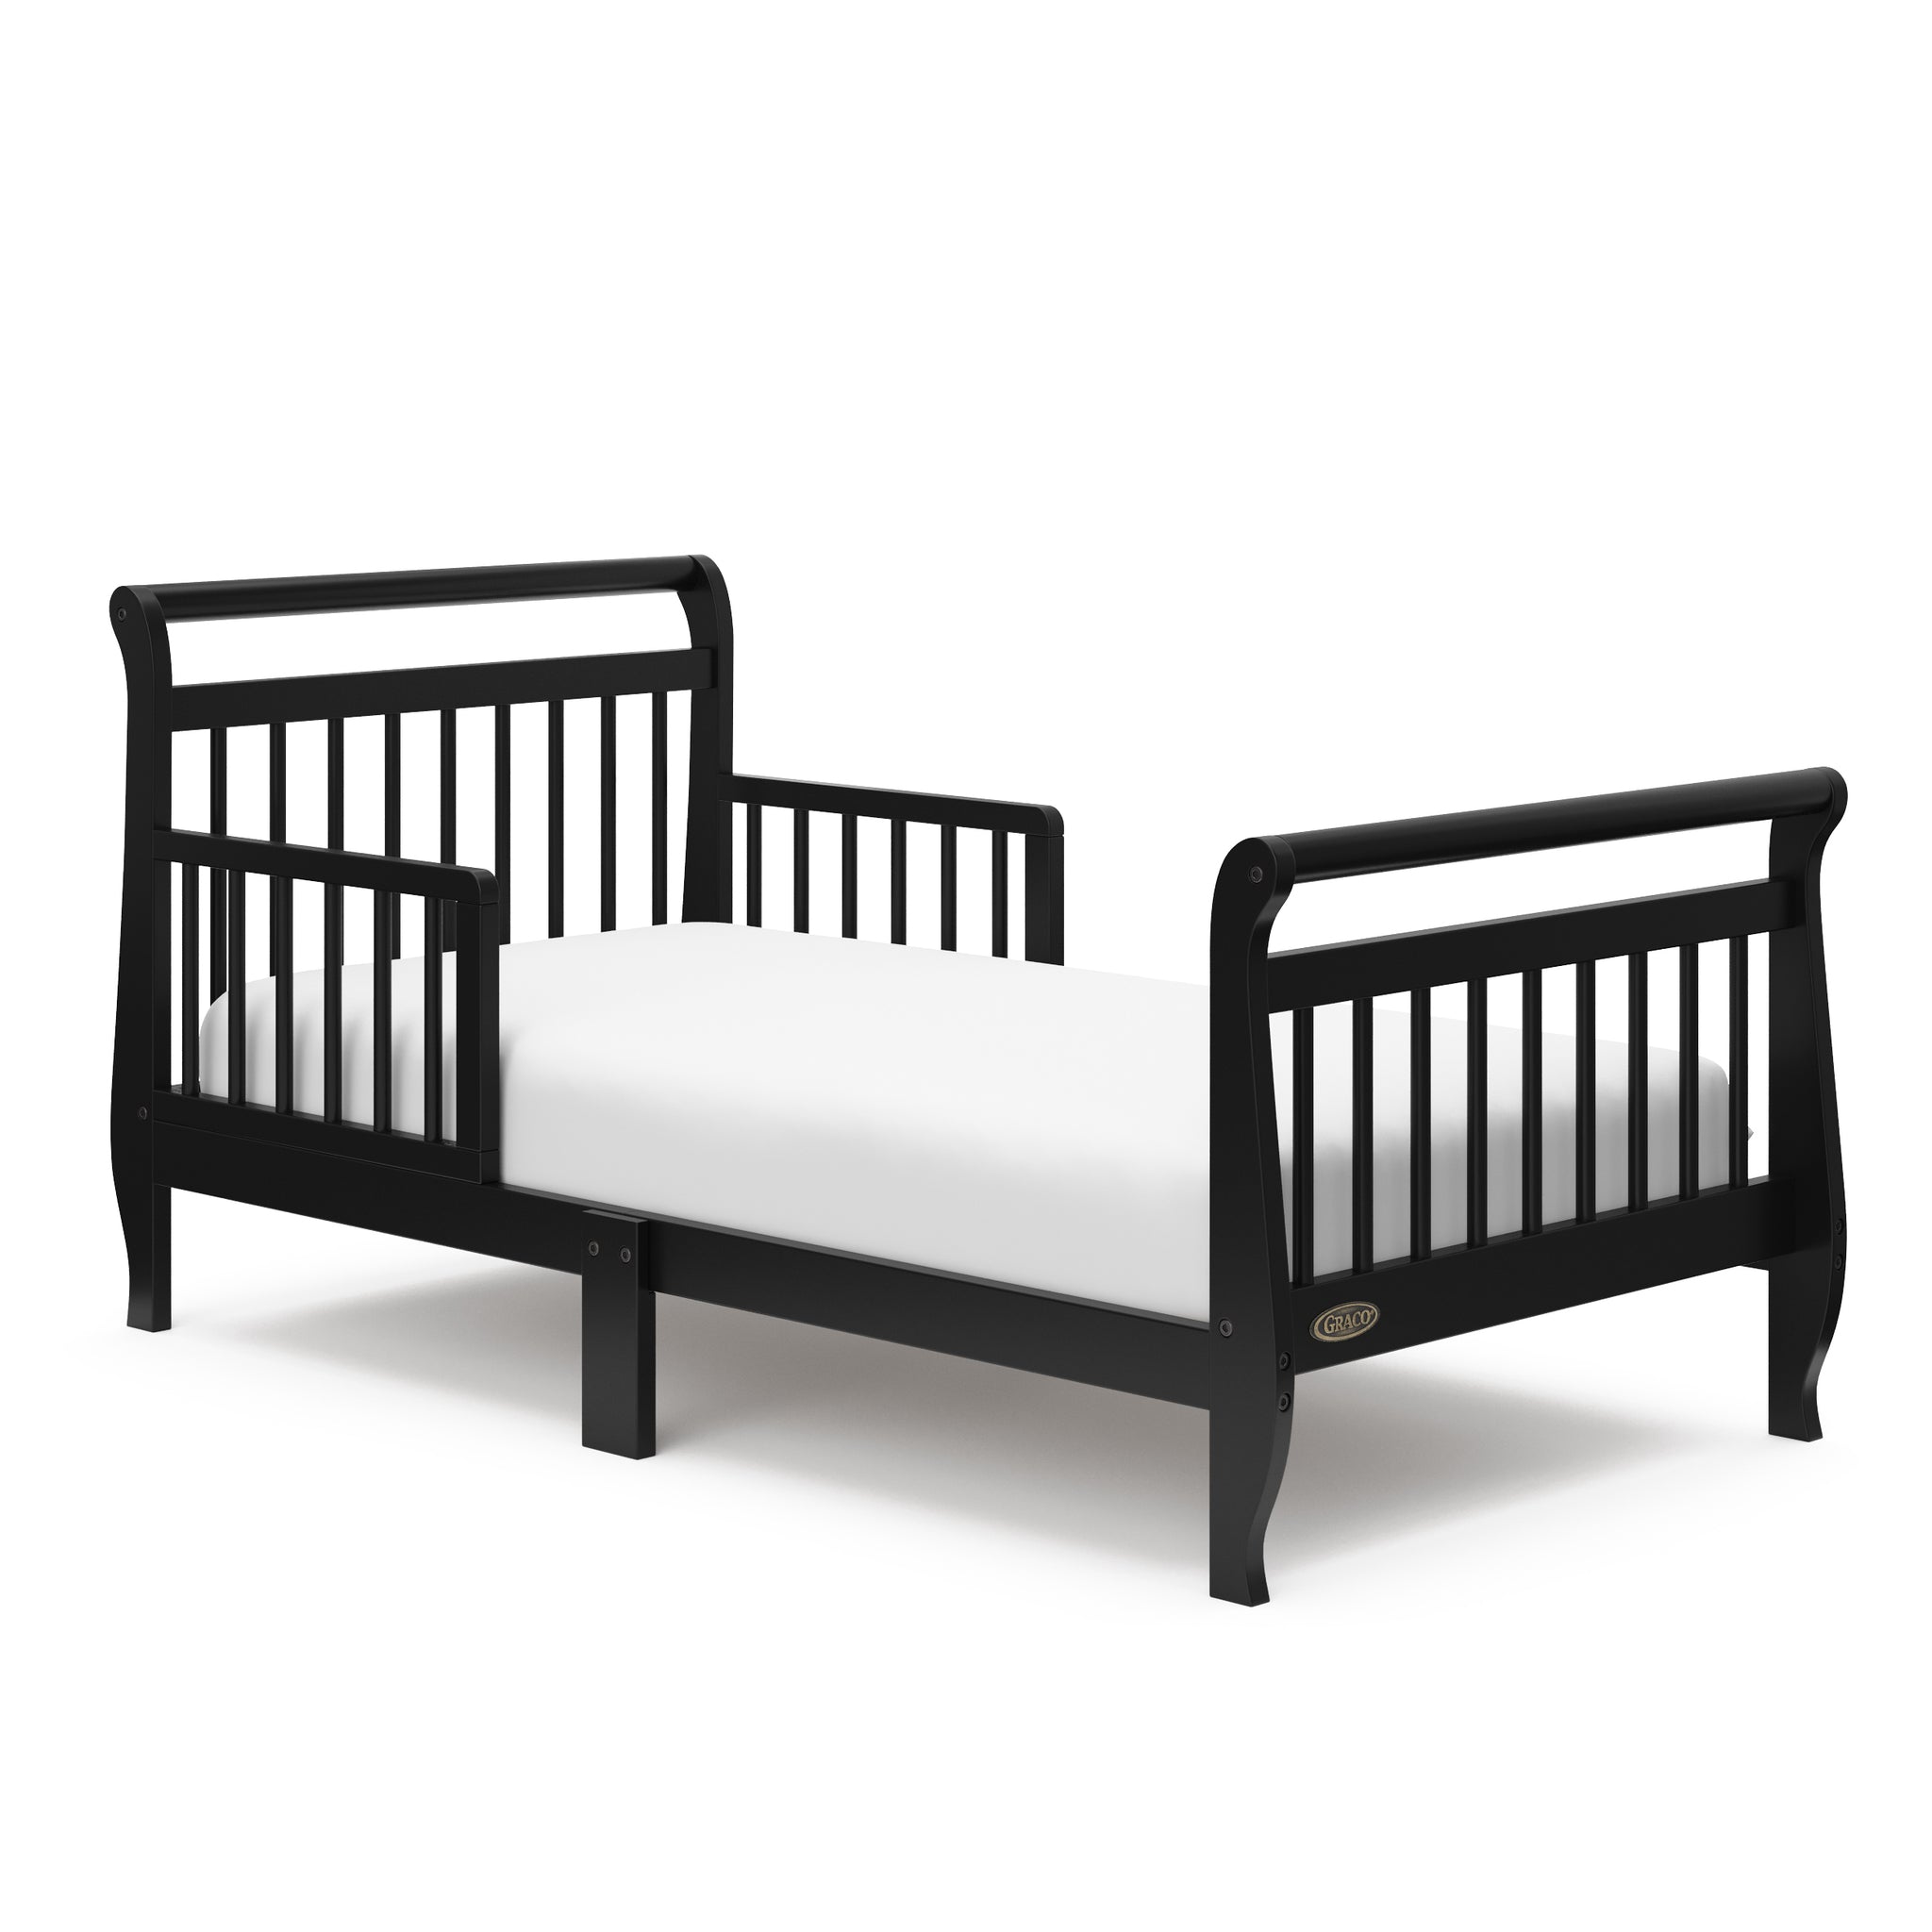 Black toddler bed with guardrails angled